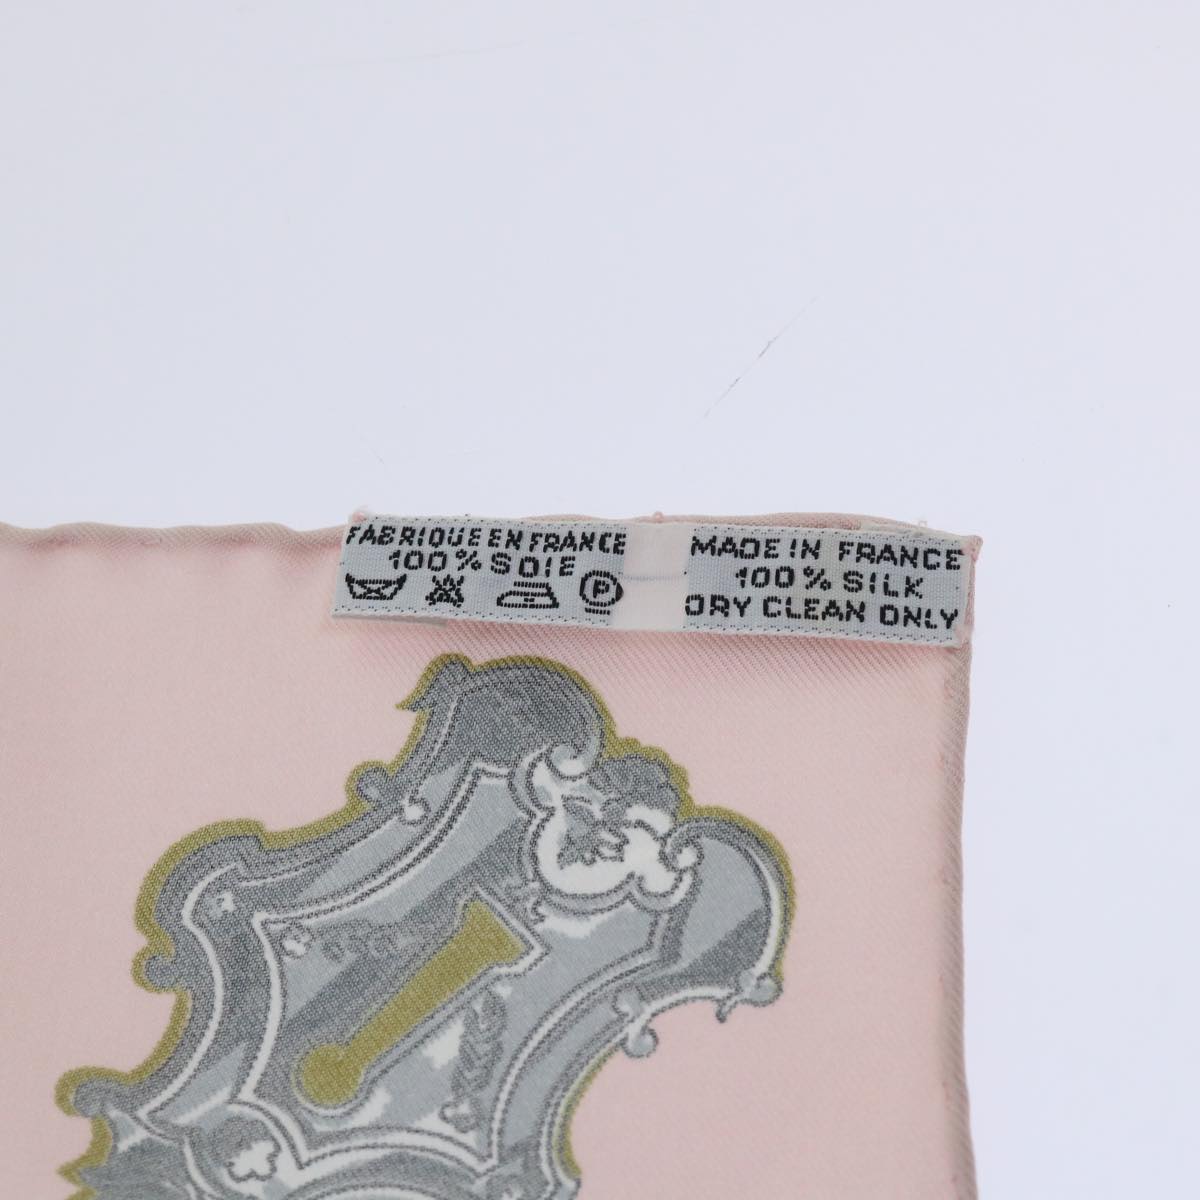 HERMES Carre 90 LES CLES Scarf Silk Pink White Auth 53760